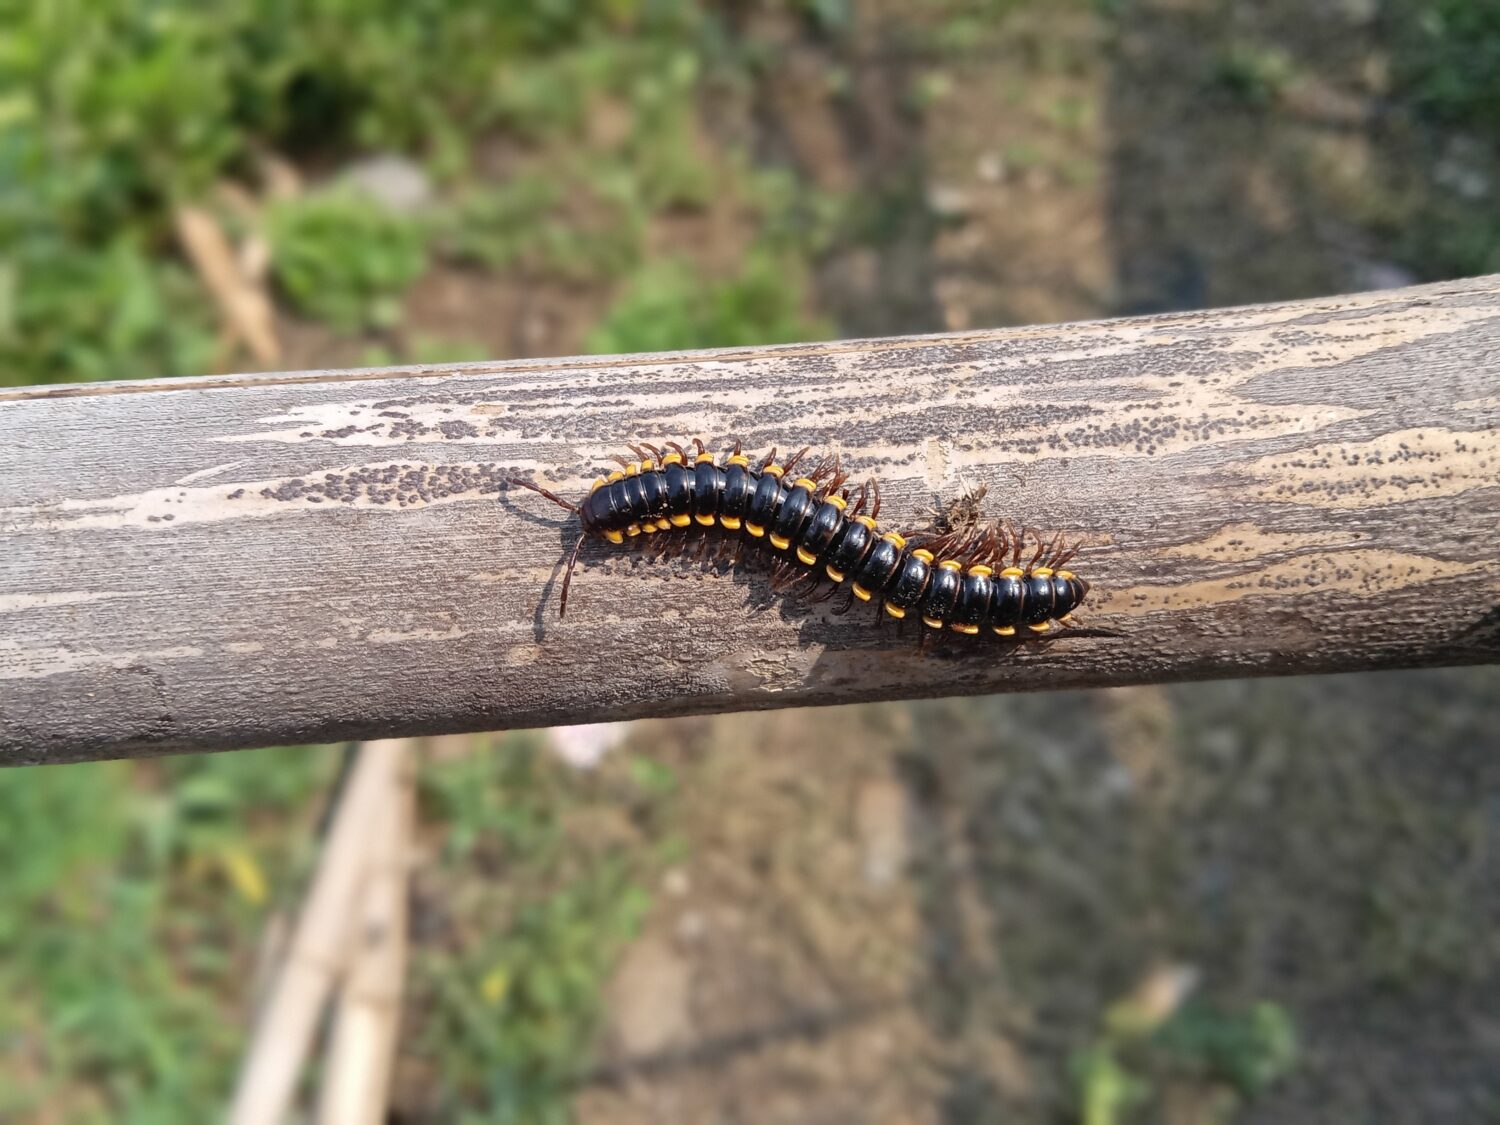 a small millipede caterpillar or an animal whose Latin name is Harpaphe haydeniana. but people call it the yellow-spotted millipede, almond-scented millipede or cyanide millipede. close-up